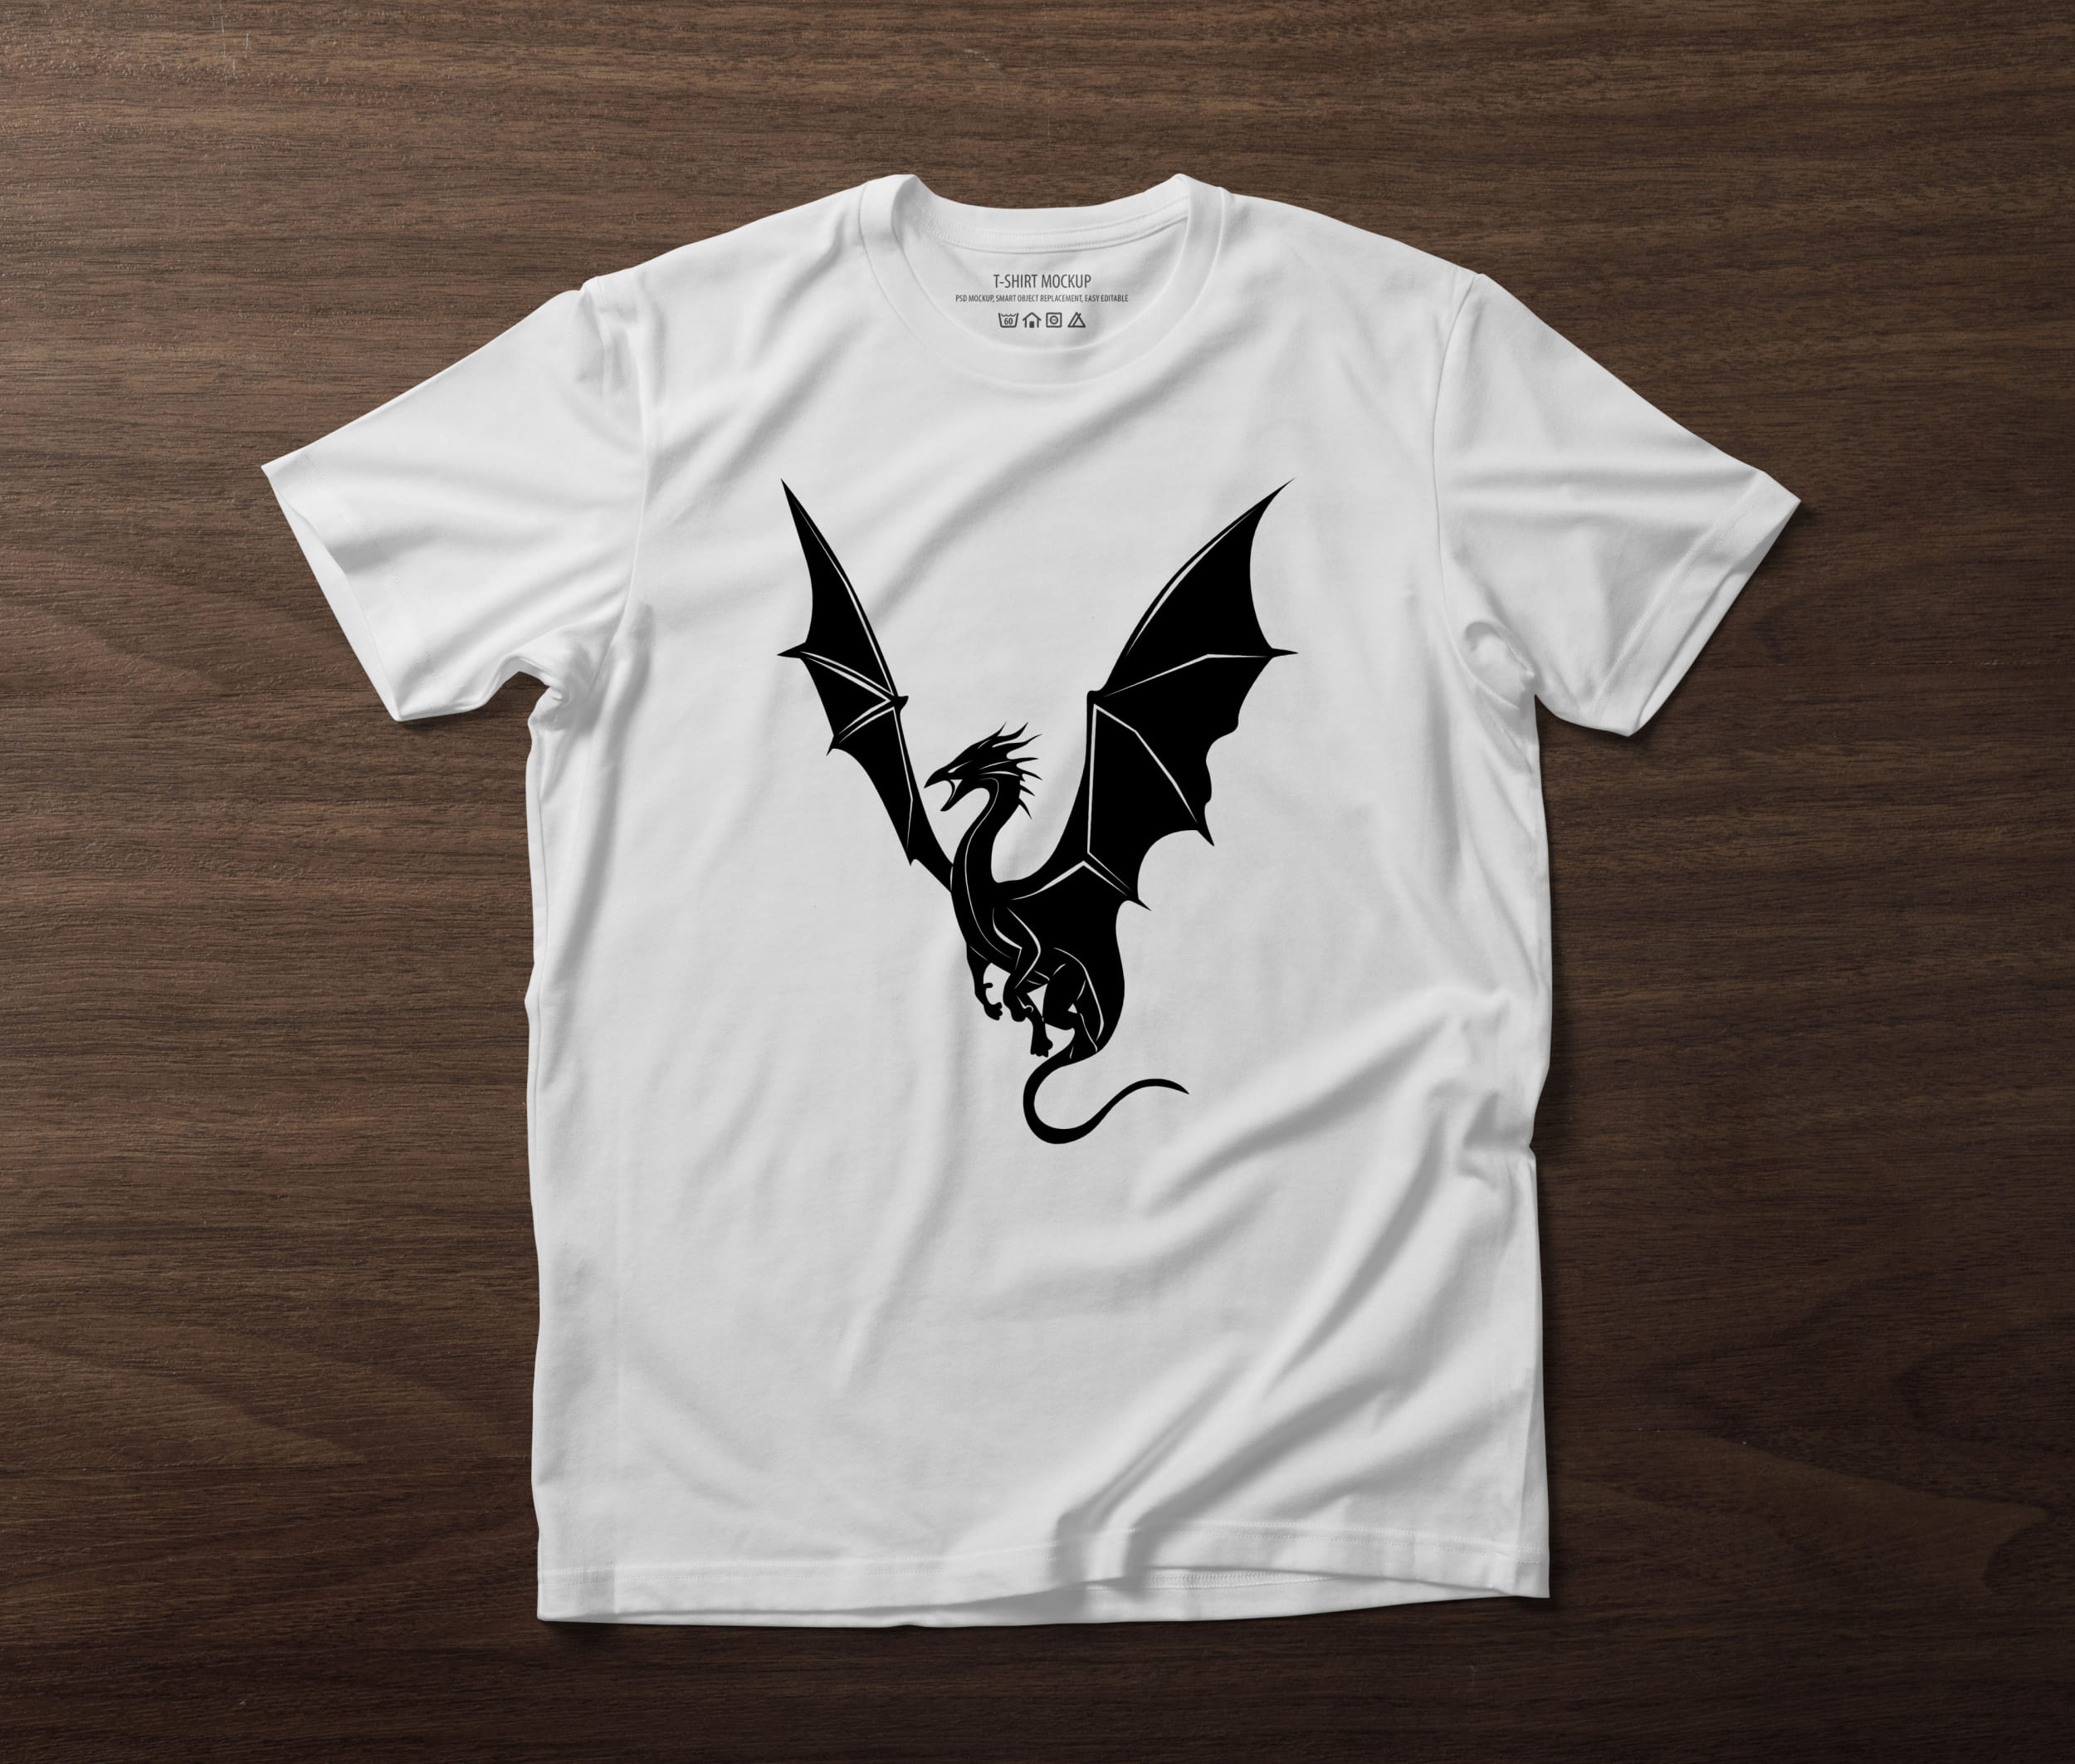 A white t-shirt on a table with a black silhouette of a dragon.